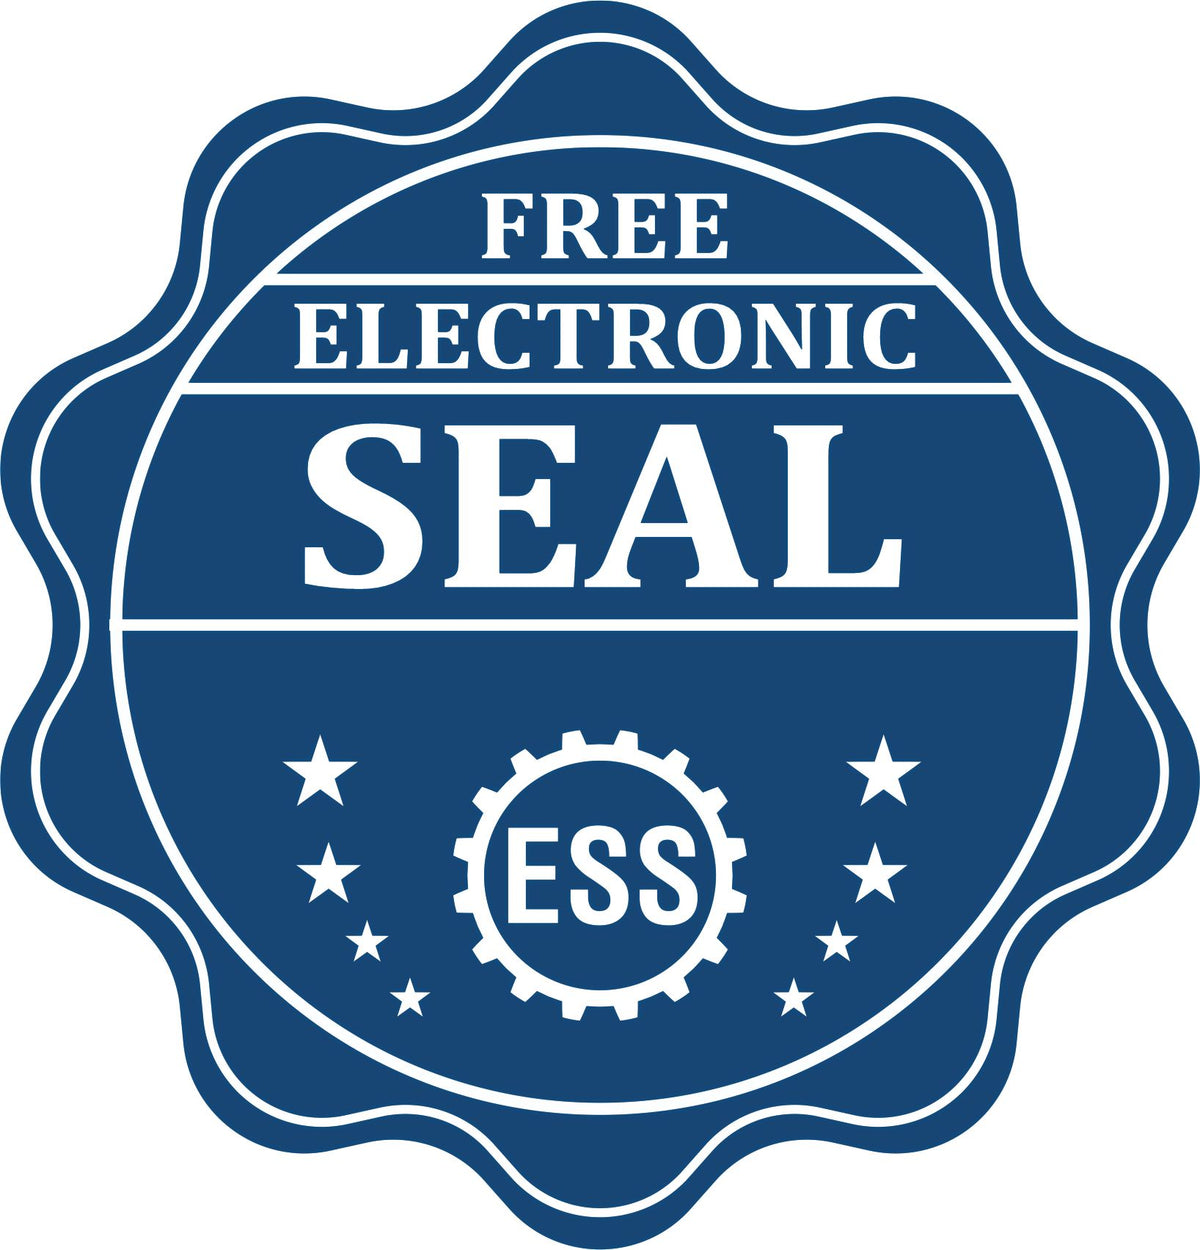 A badge showing a free electronic seal for the Long Reach New Mexico Geology Seal with stars and the ESS gear on the emblem.